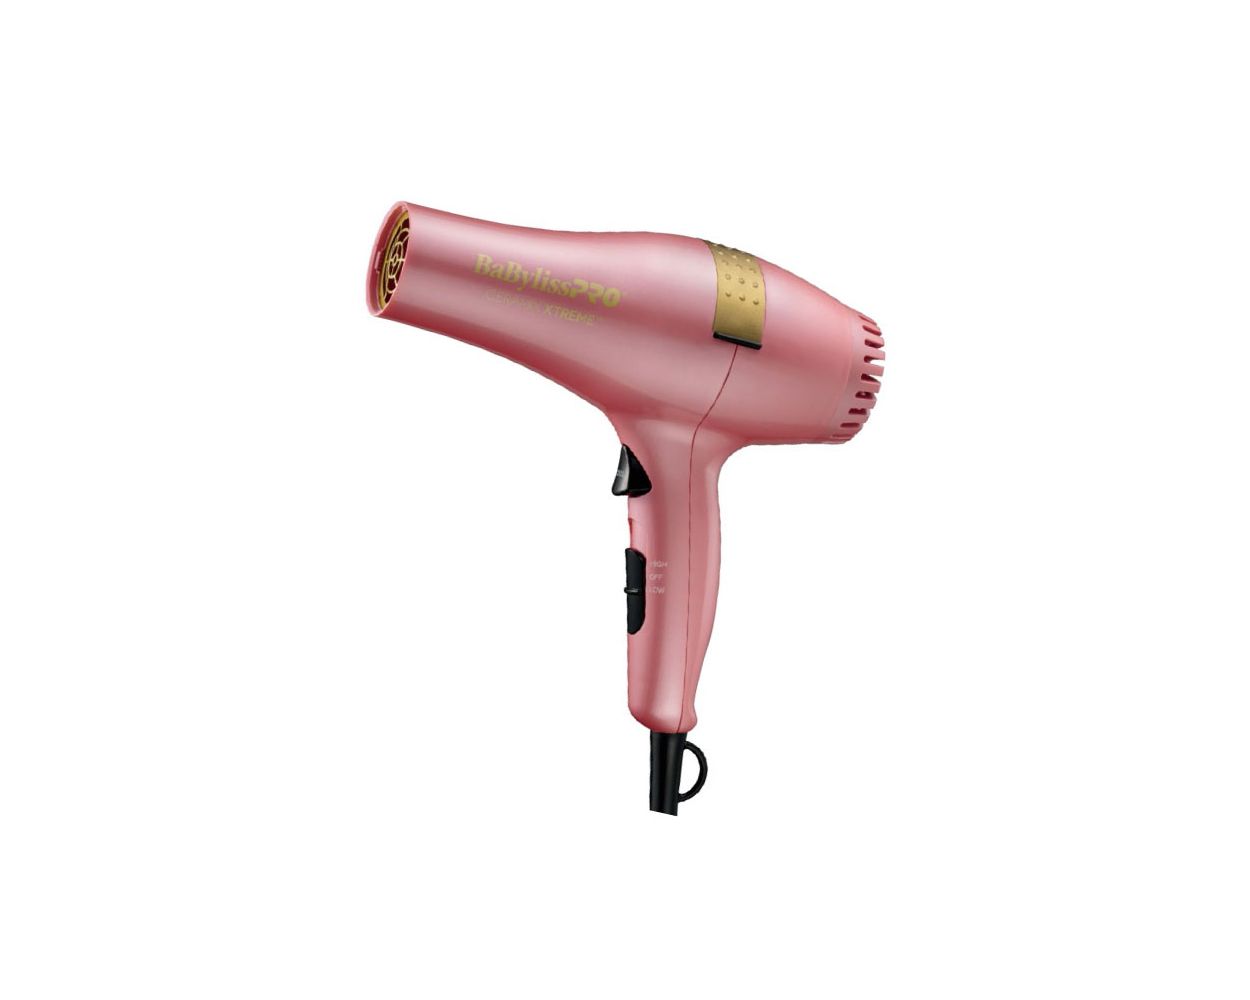 BaByliss Travel 2000W Hair Dryer Compact Small with Folding Handle - 5344U  Black 880147432878 | eBay